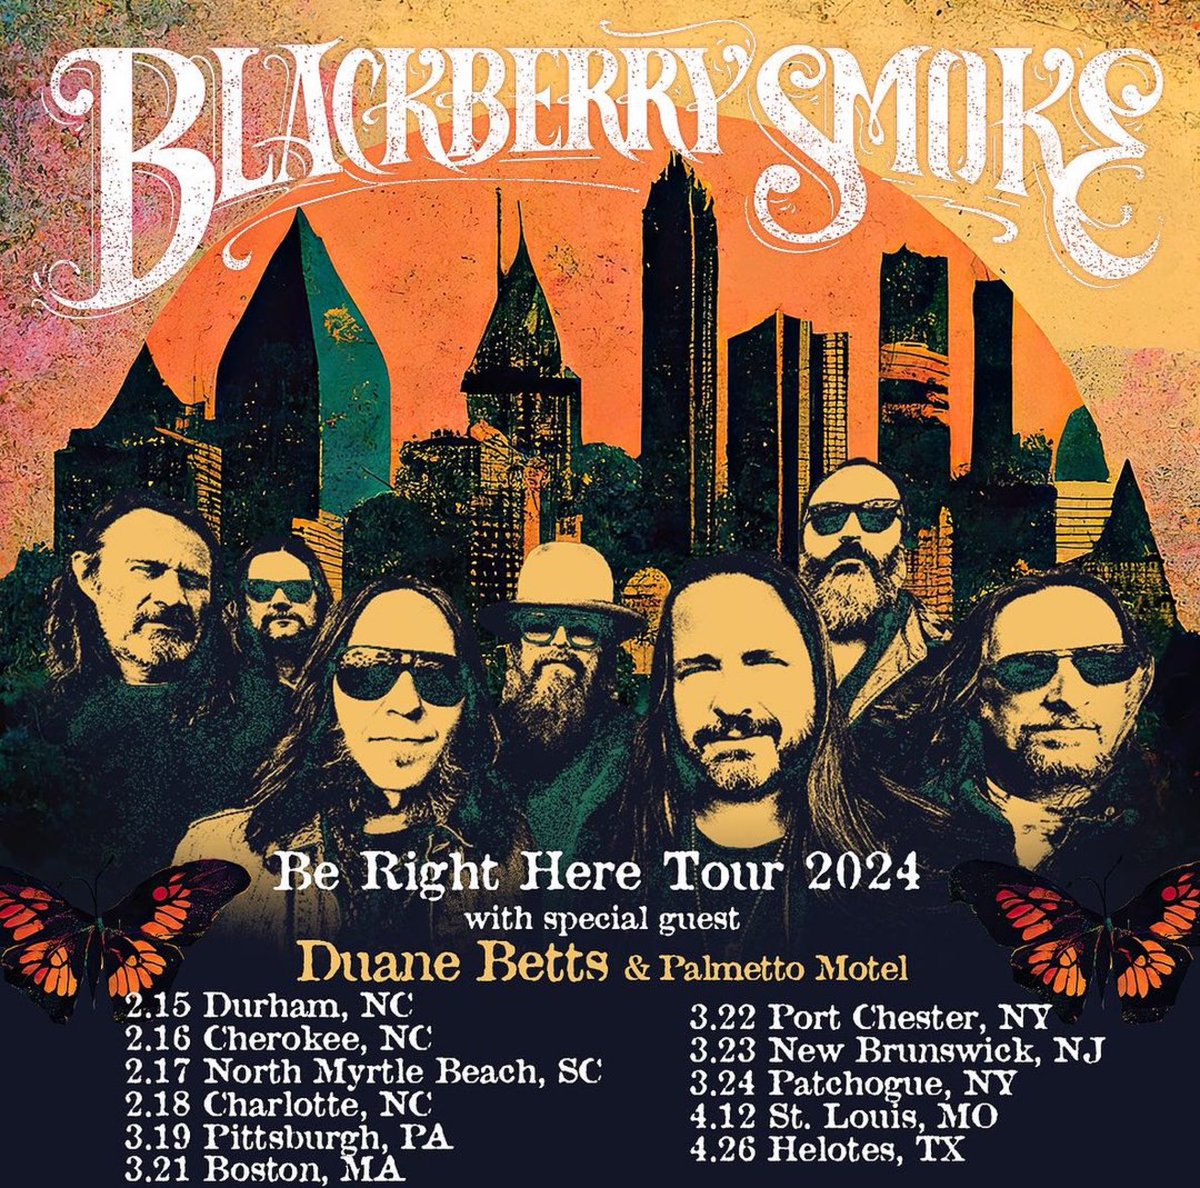 Hey now! DB & Palmetto Motel will be supporting our good buddies @blackberrysmoke! The first dates are coming up next month in the Carolinas! Hope to see y’all! 📸 @smokingmonkeyphoto